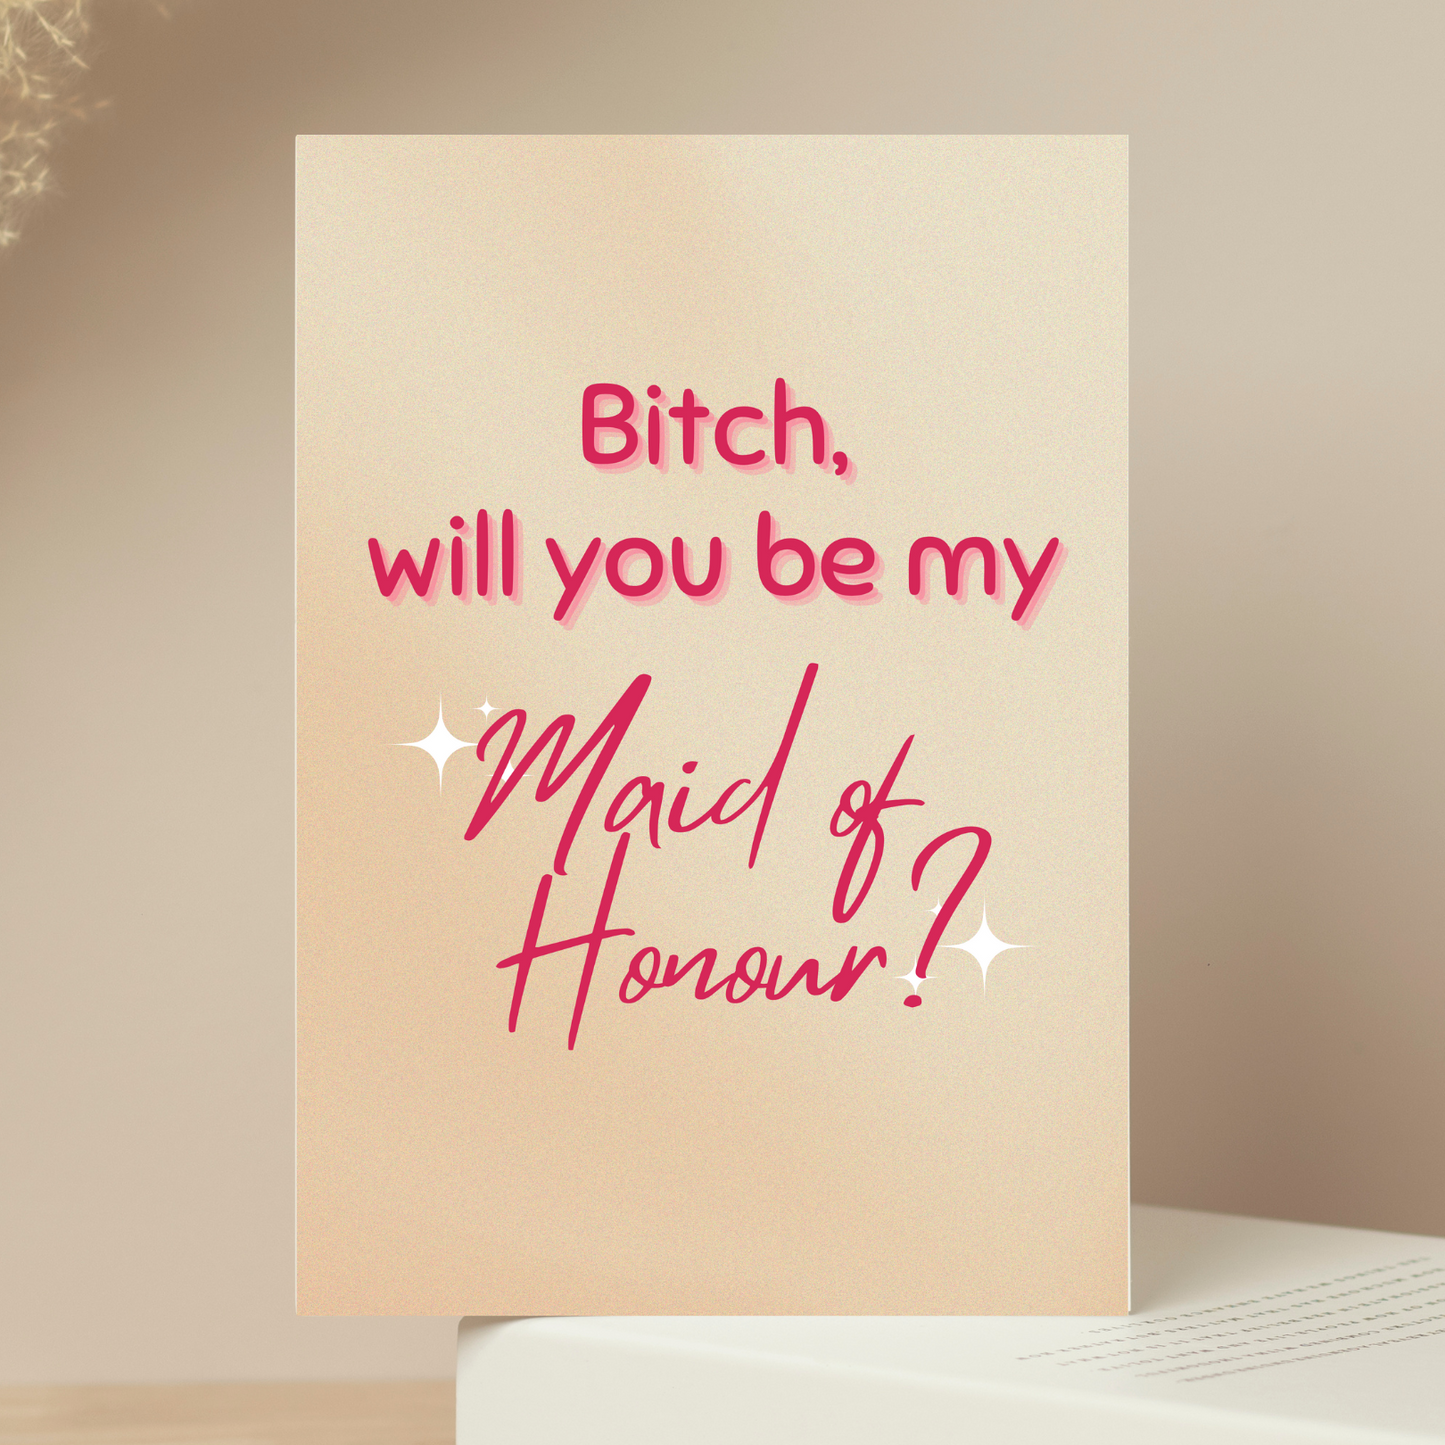 Will You Be My Bridesmaid/Maid of Honour? Card